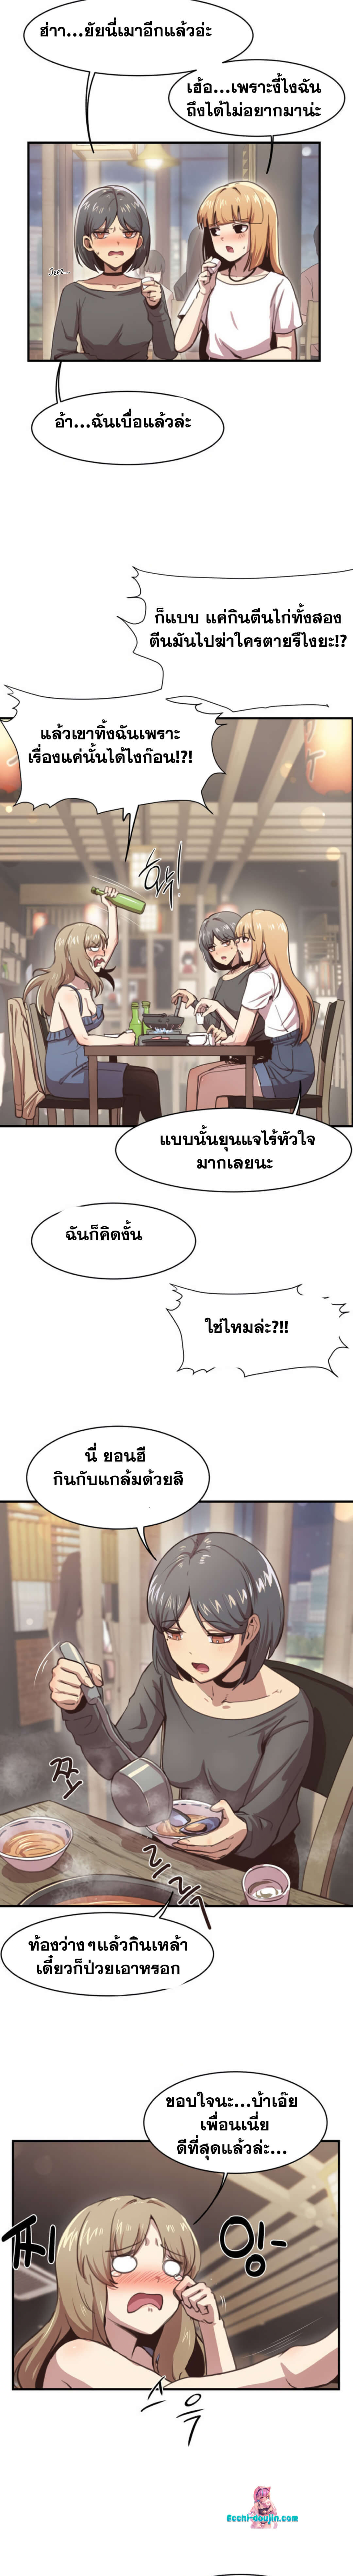 With My Brother’s Friends ตอนที่ 1 ภาพ 1